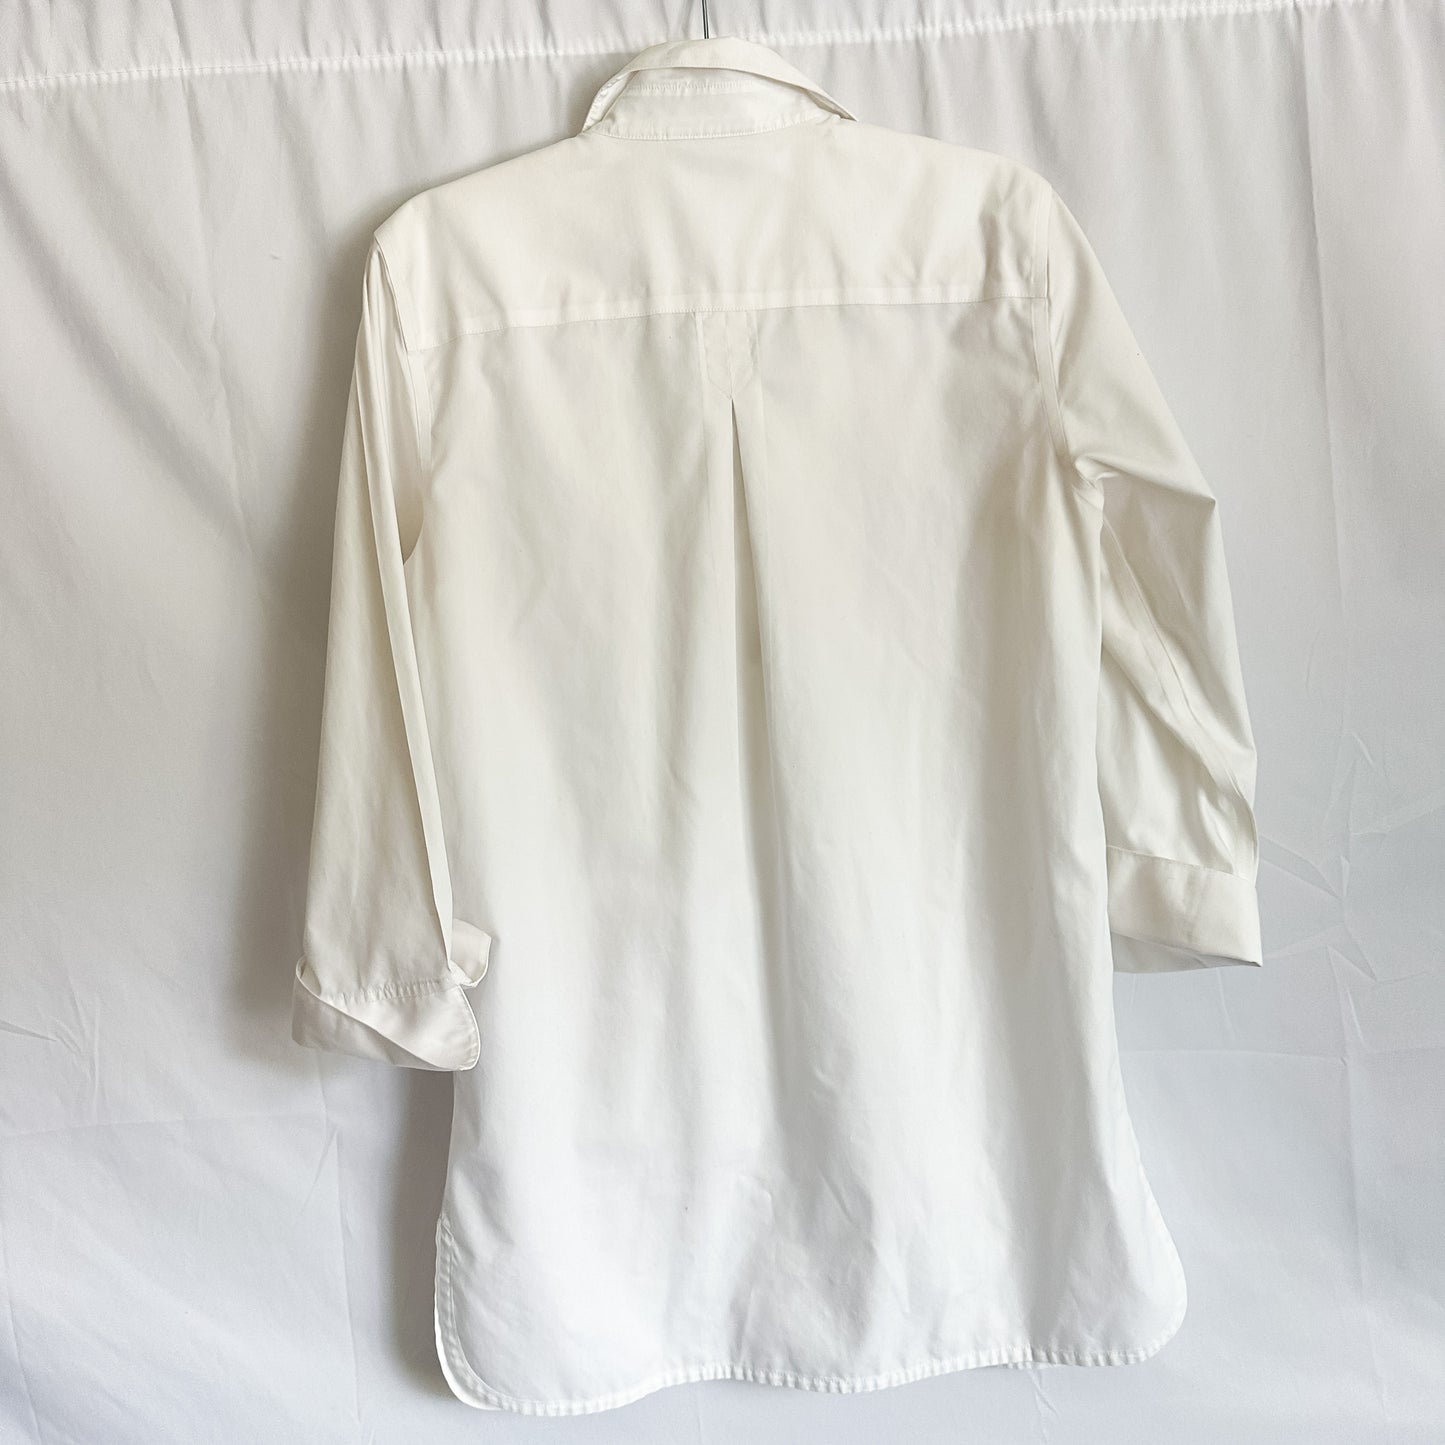 White Tunic Length Button Down Top (fits XS-S)